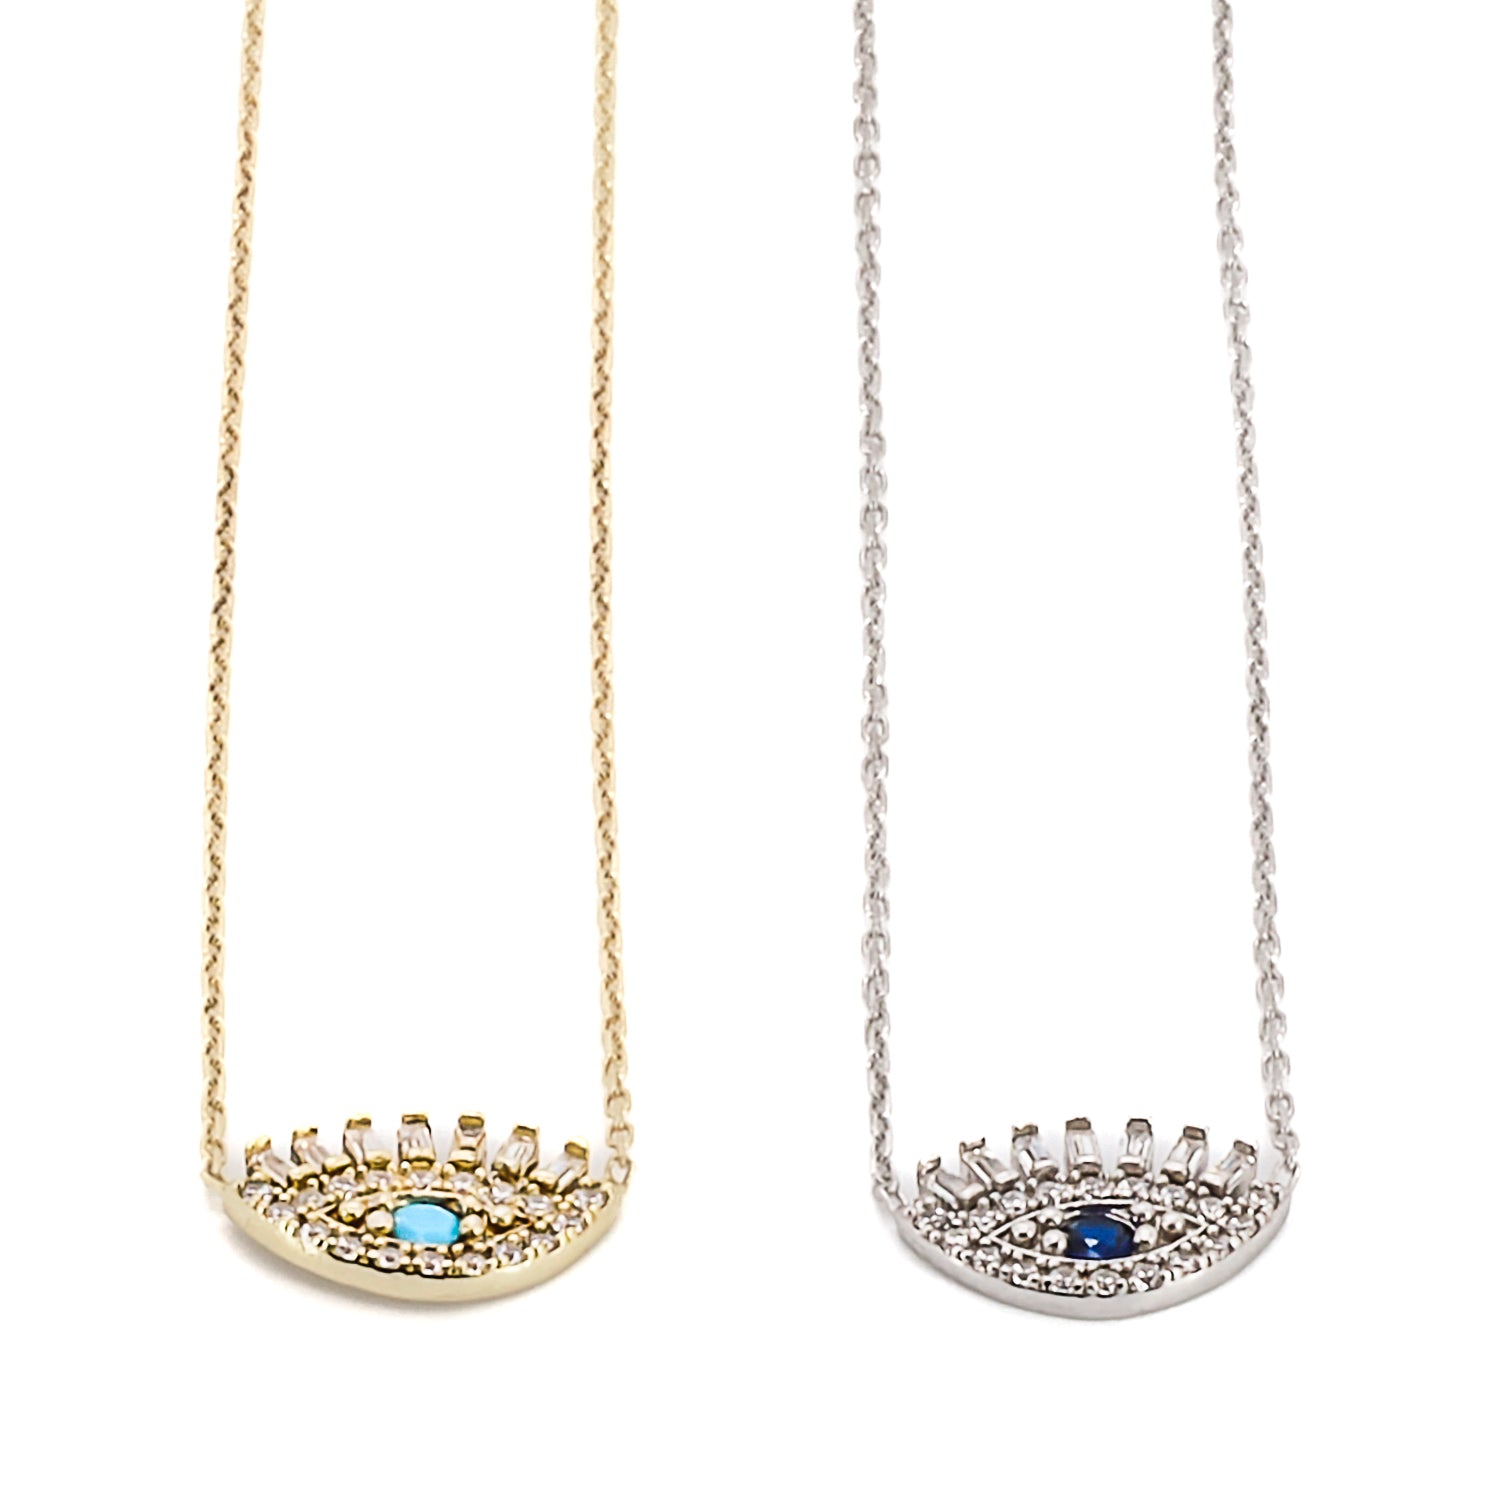 The Diamond Long Lash Necklace is a stunning piece of jewelry that is available in two color options. The first option is made of sterling silver with sapphire and zircon accents, while the second option is 18K gold plated with sparkly zircon and turquoise stone.